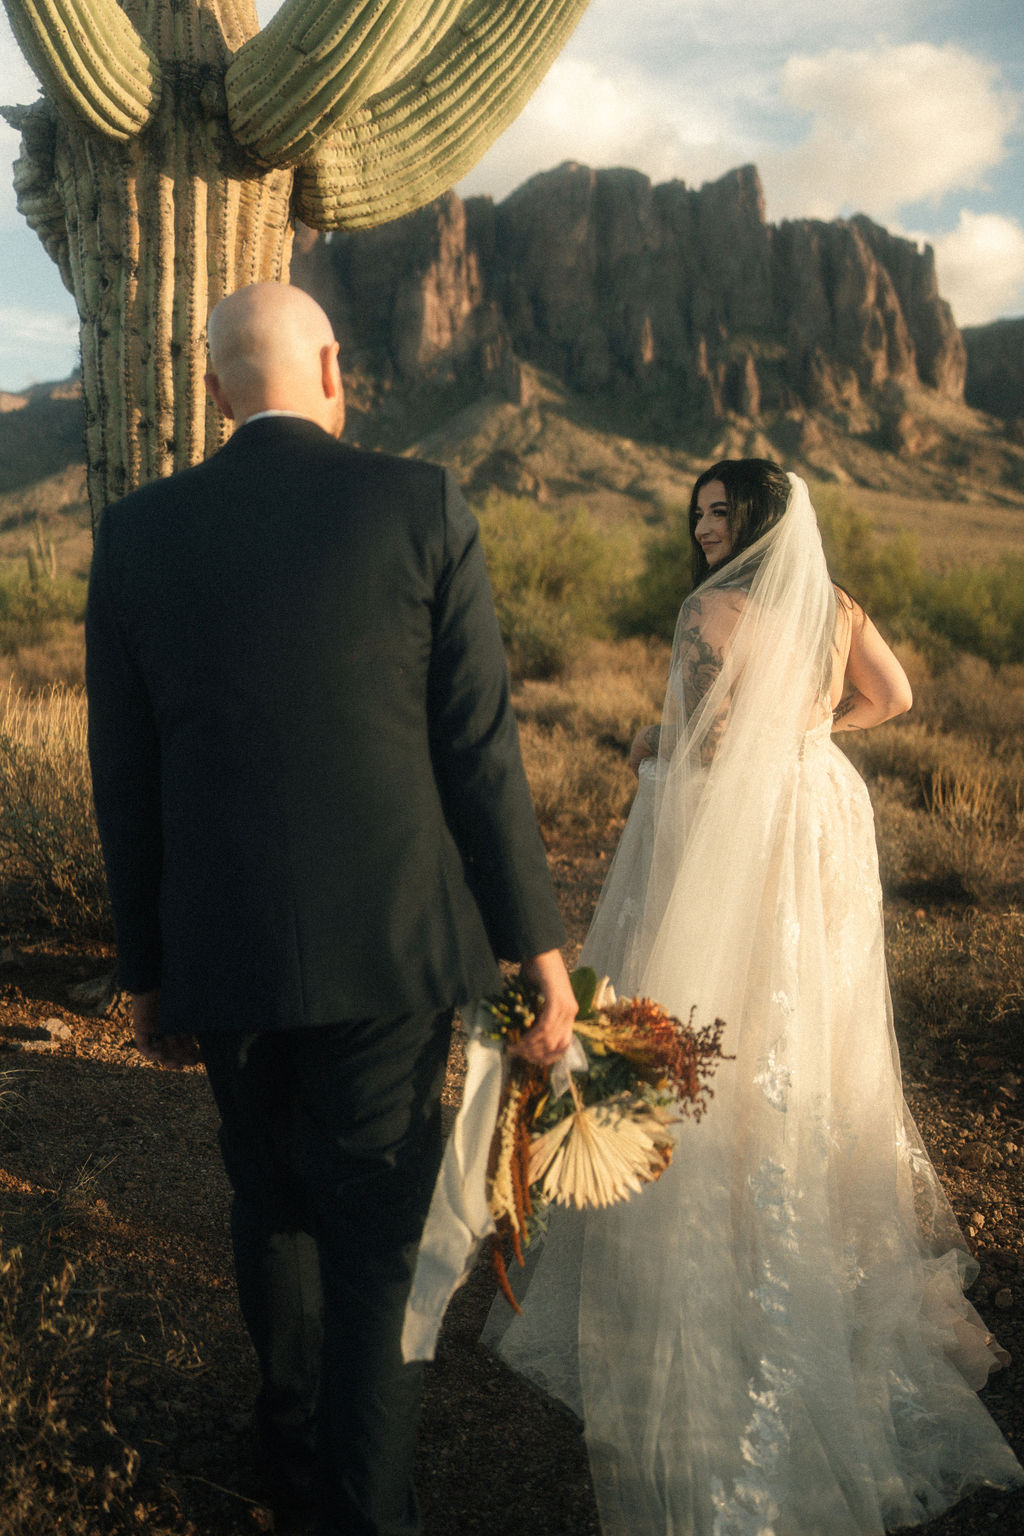 A couple stands embraced near a large cactus in a desert landscape with rocky mountains in the background. The woman is wearing a long white dress with a flowing train at a wedding in Arizona